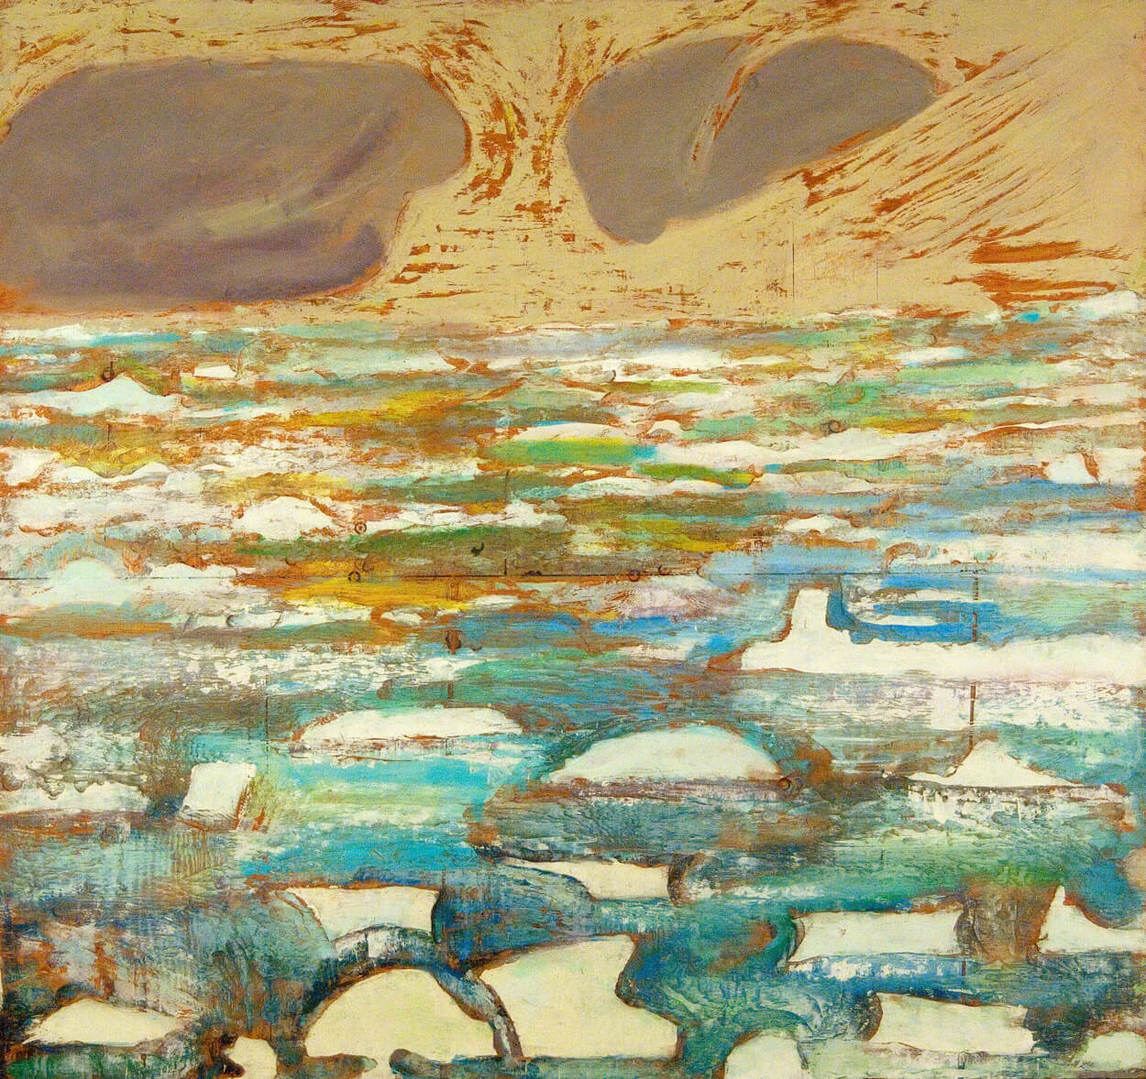 Paterson Ewen, Ice Floes at Resolute Bay, 1983